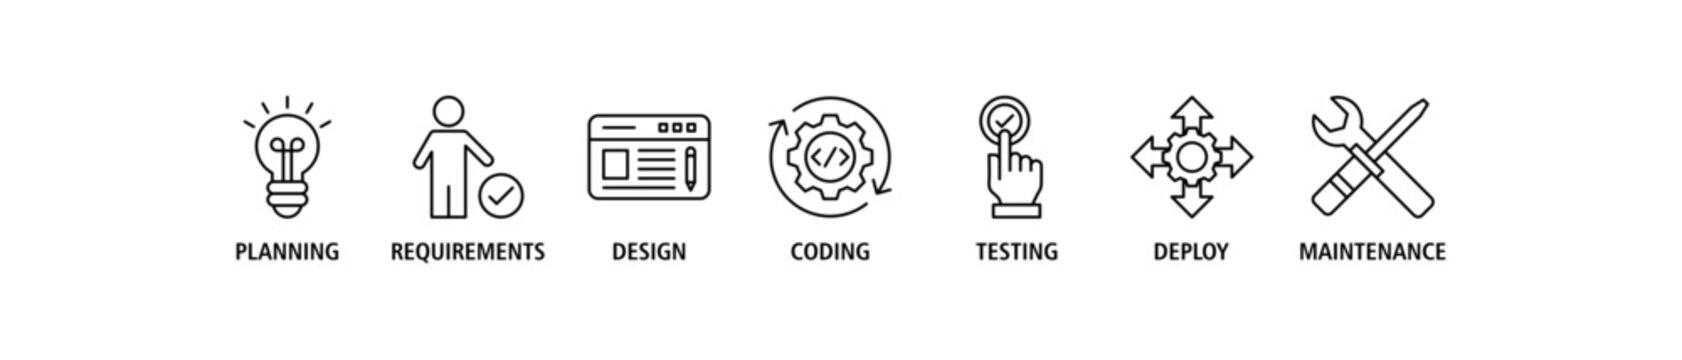 Software development life cycle banner web icon set vector illustration concept of sdlc with icon of planning, requirements, design, coding, testing, deploy and maintenance